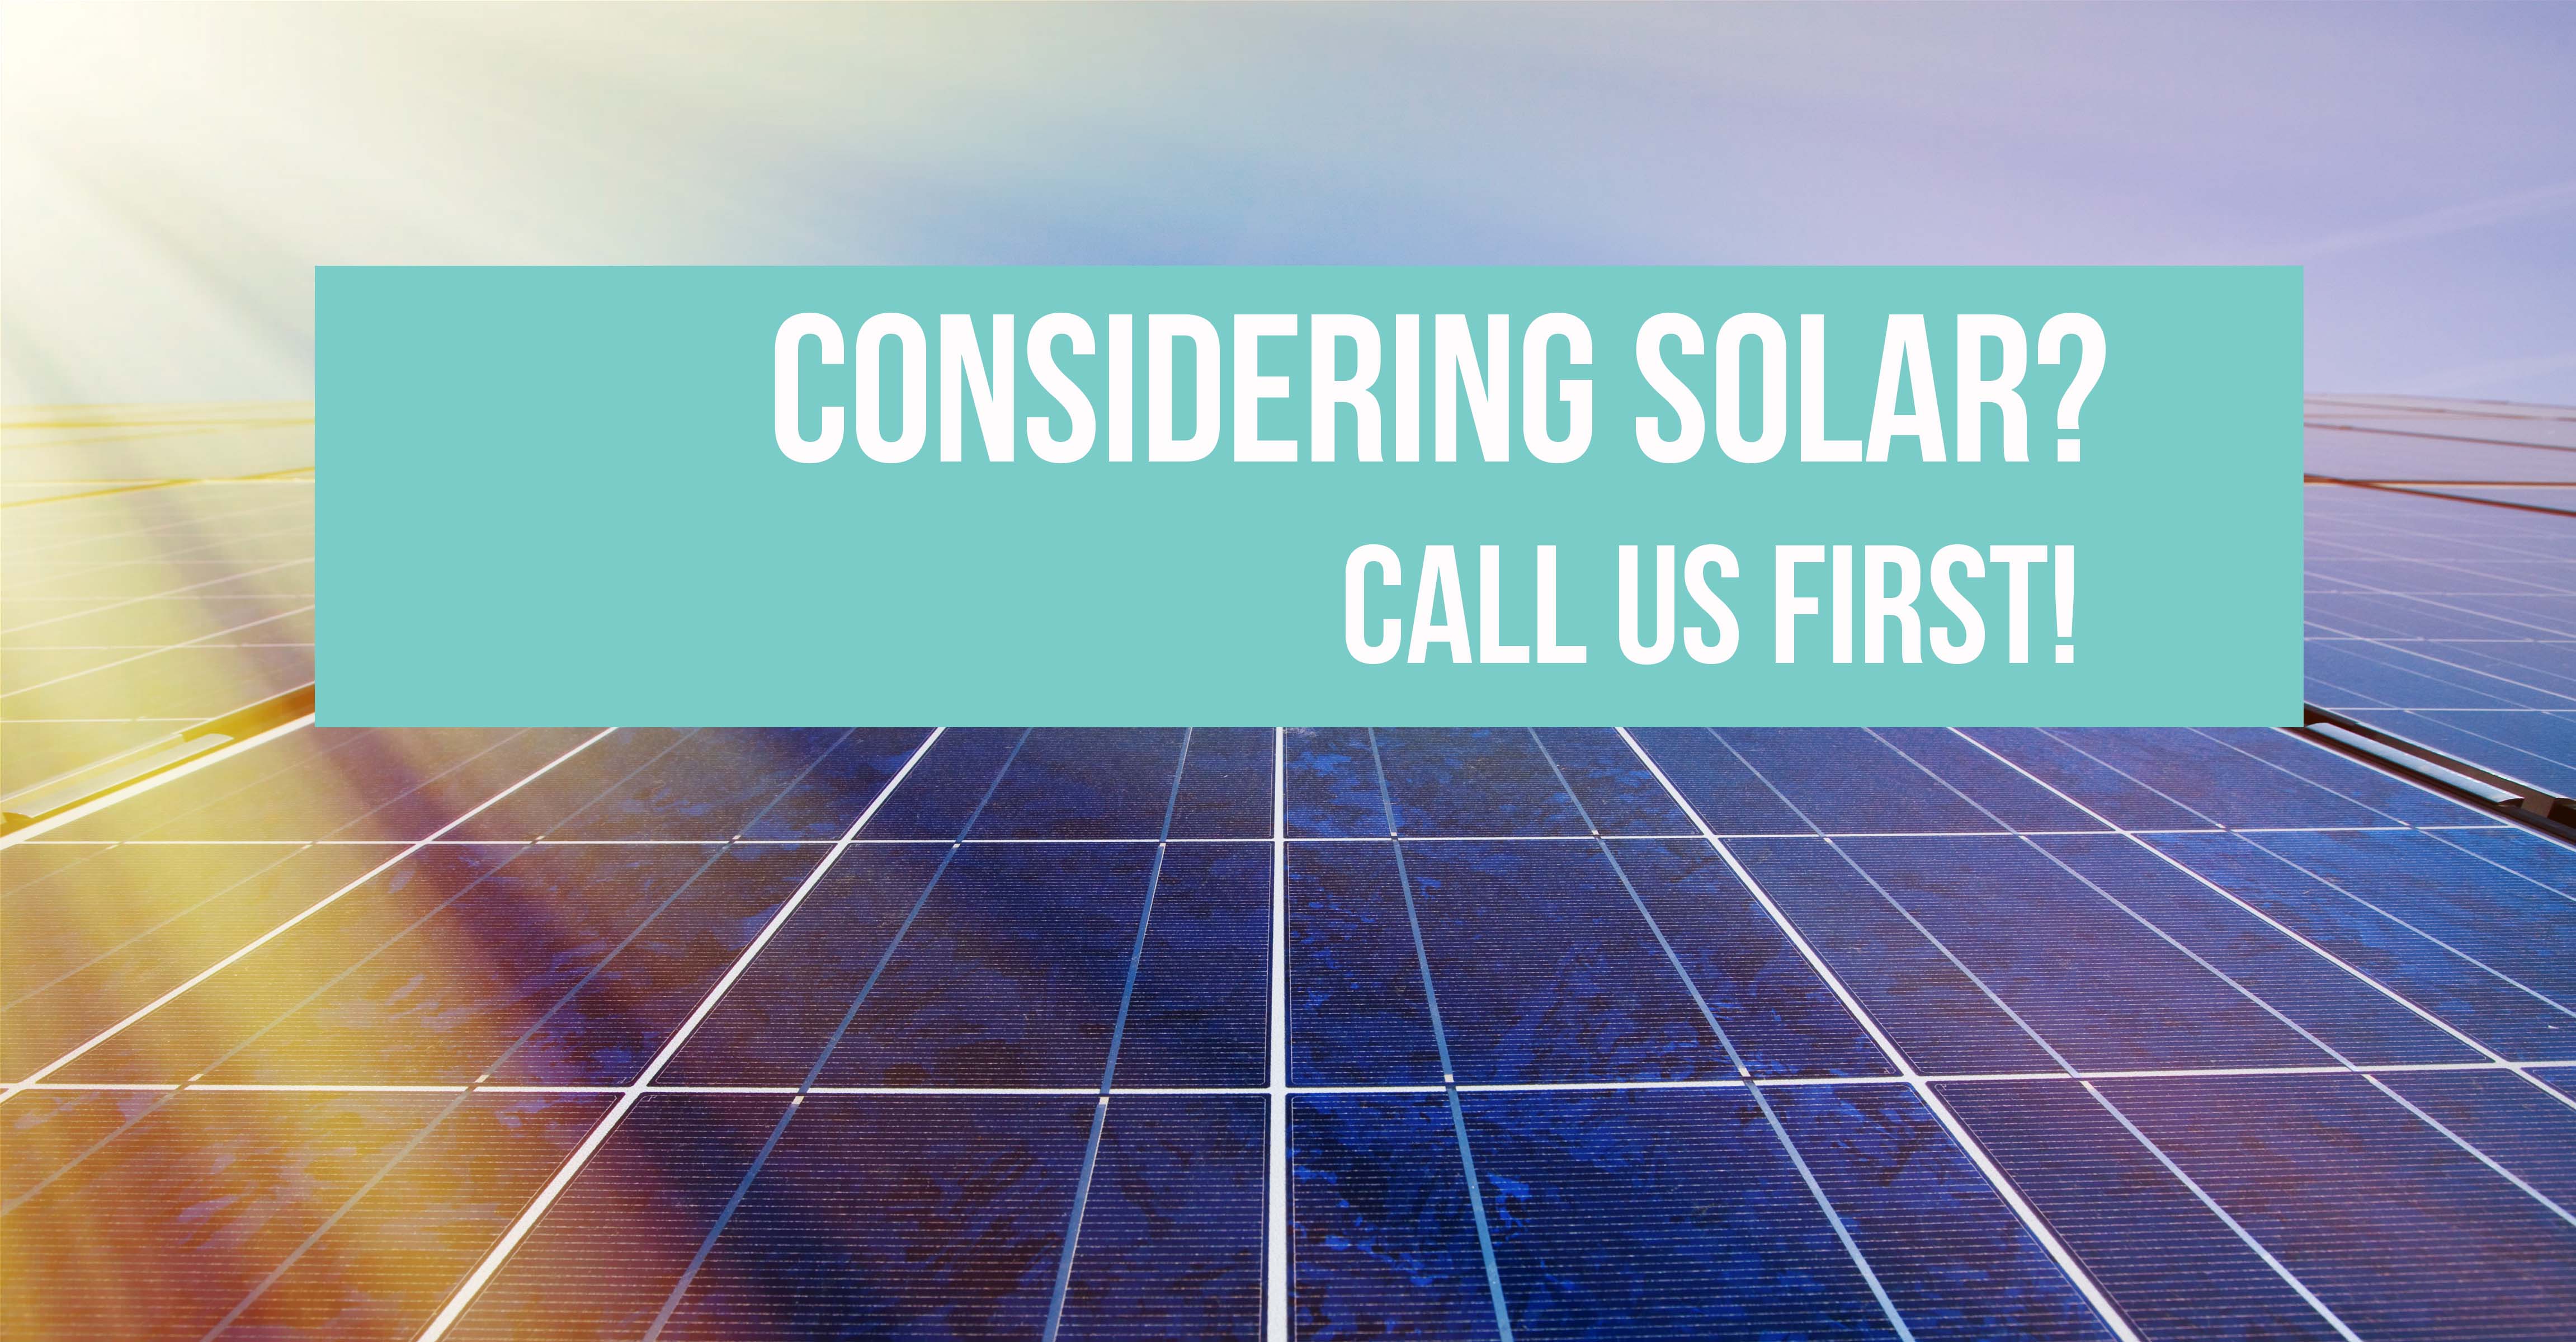 Solar?  Call us first!